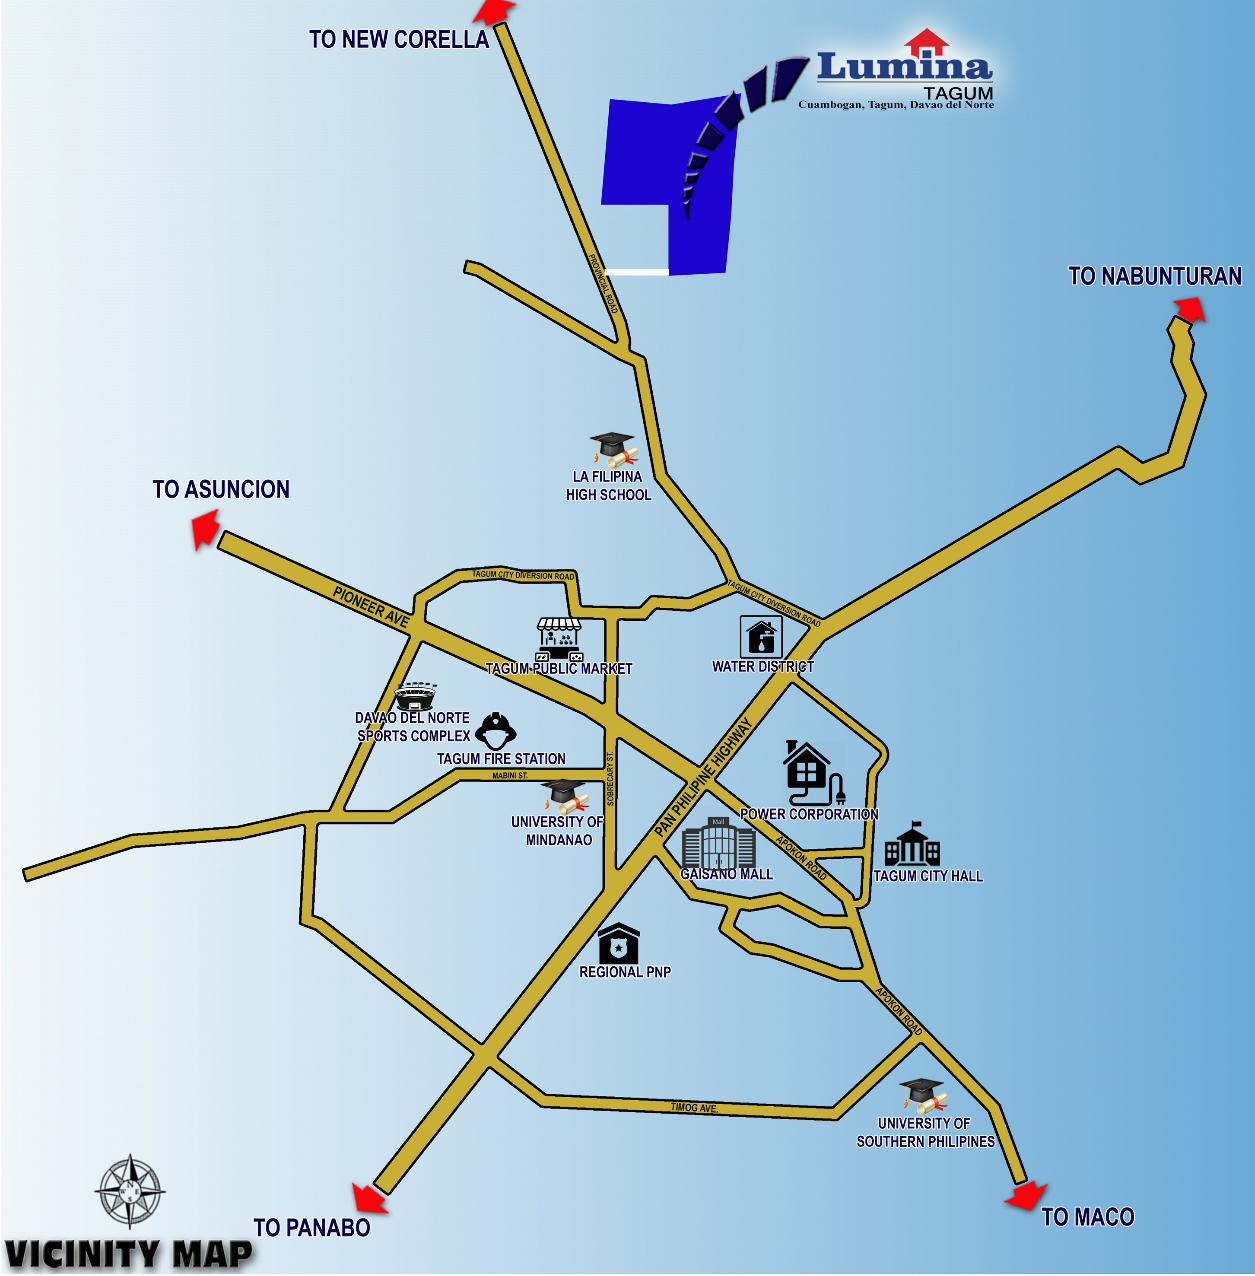 VICINITY-MAP-1645422086.png